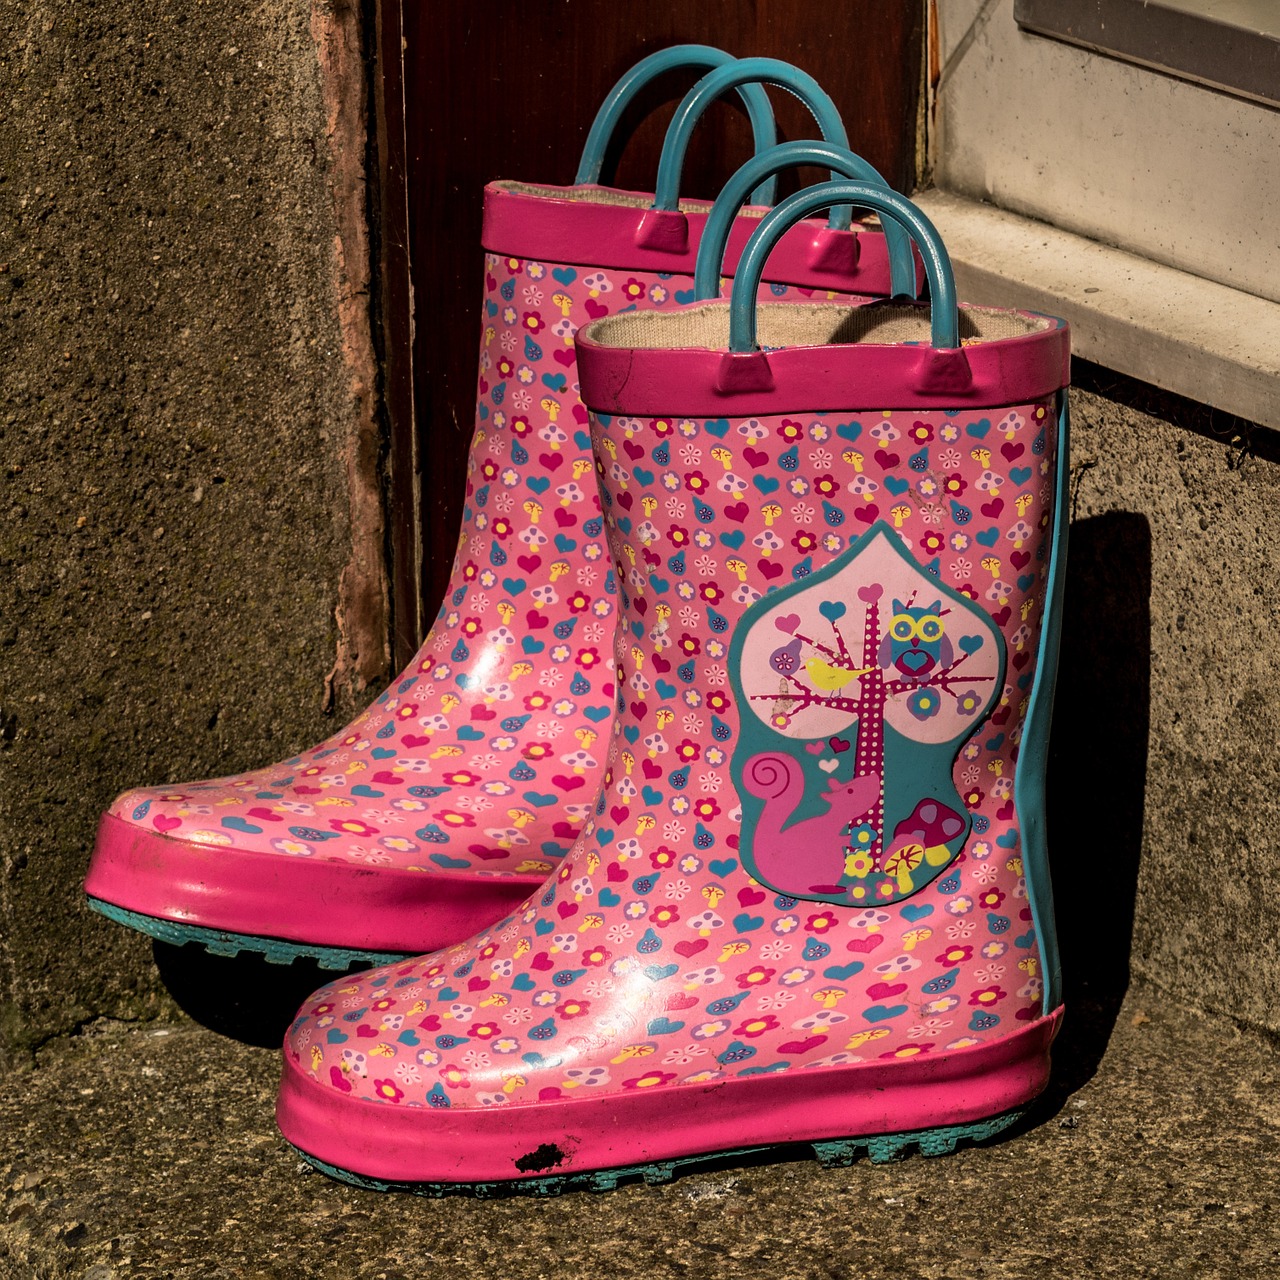 boots wellies wellington boots free photo